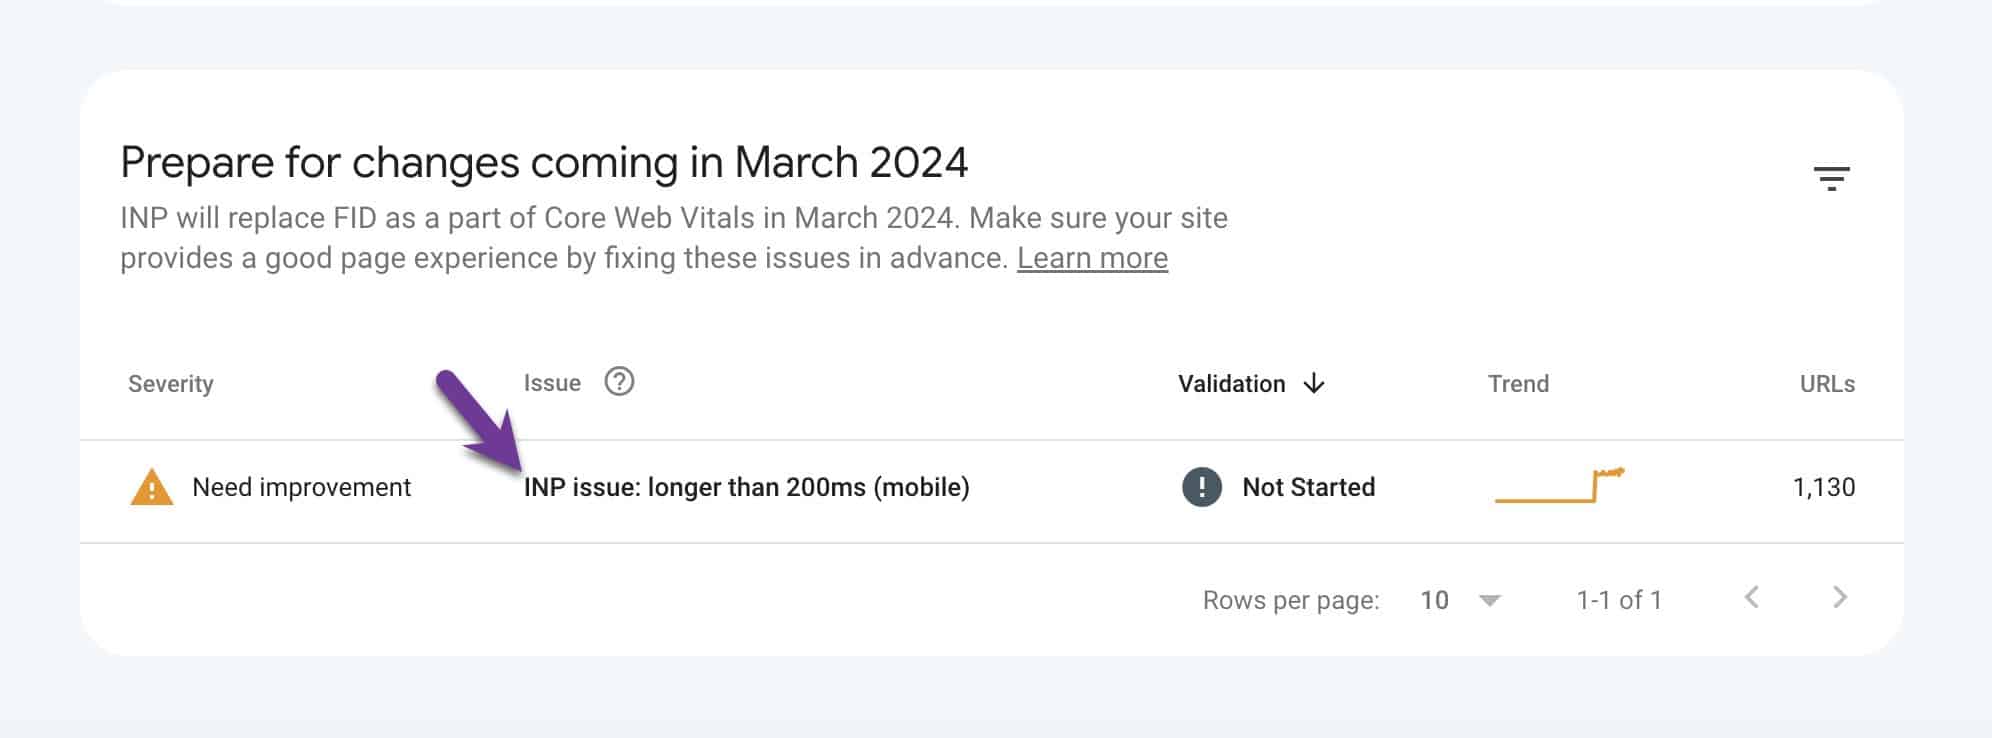 Google Search Console Core Web Vitals Mobile report showing new section called Prepare for changes coming in March 2024 which shows pages that need INP improvements.